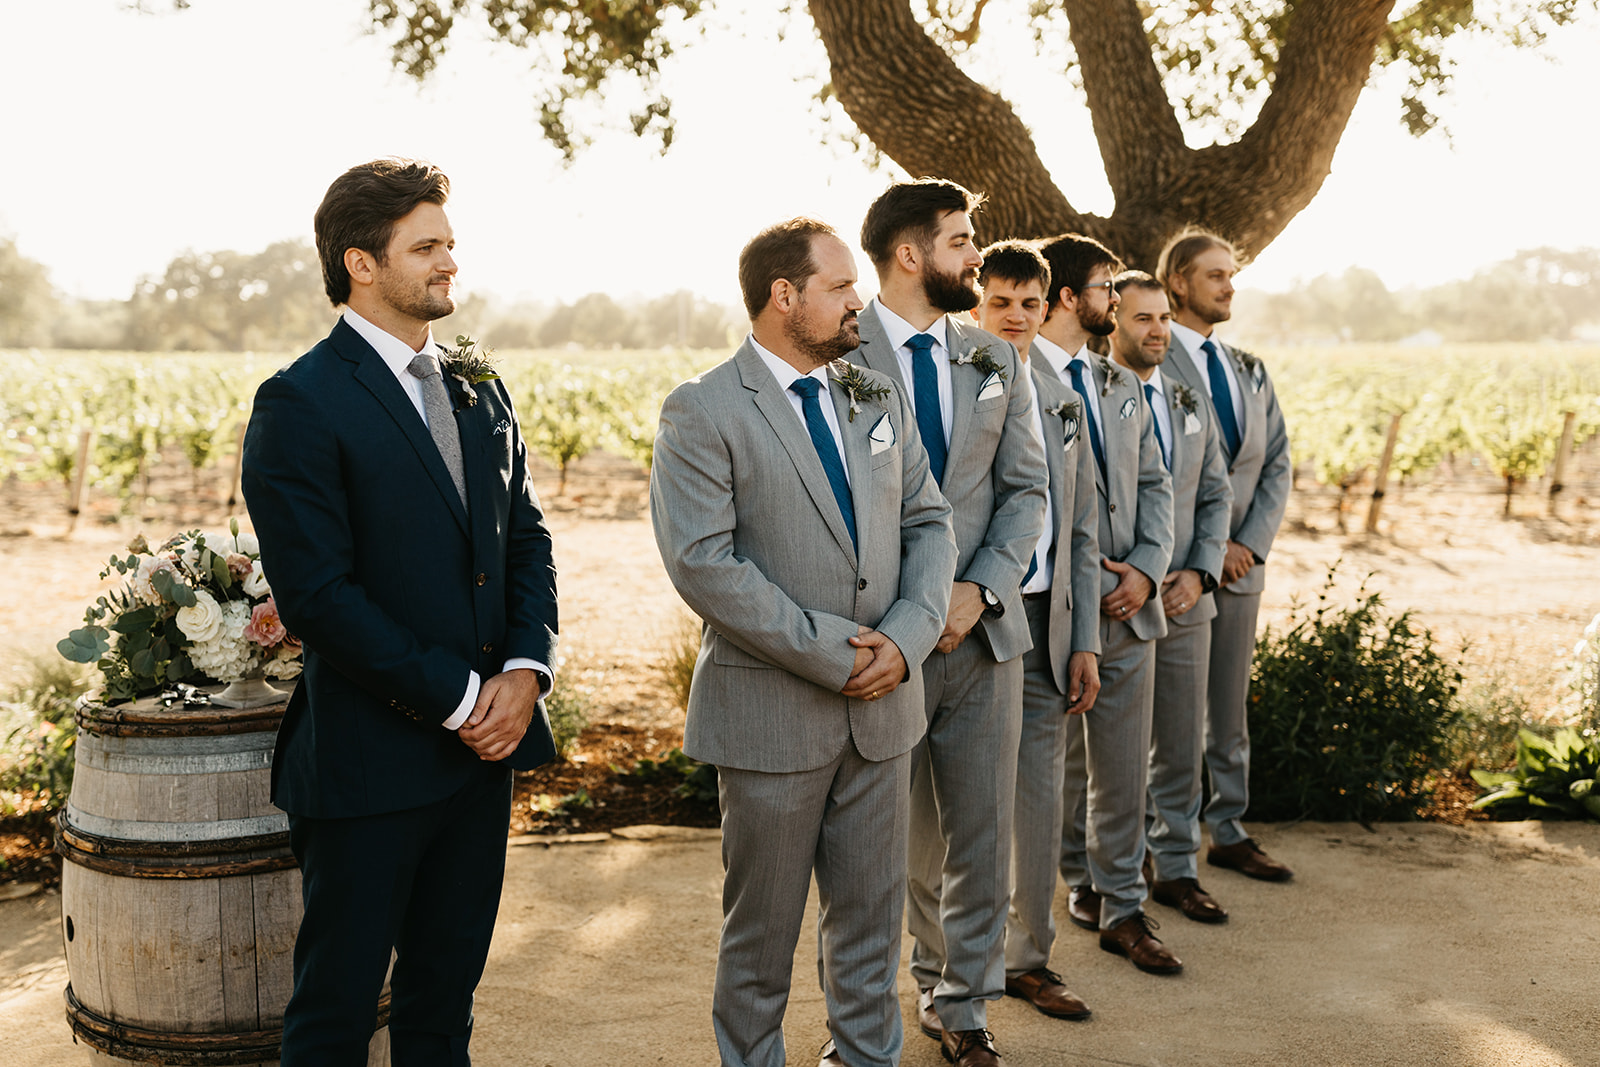 groom stands with groomsmen in grey suits and blue ties